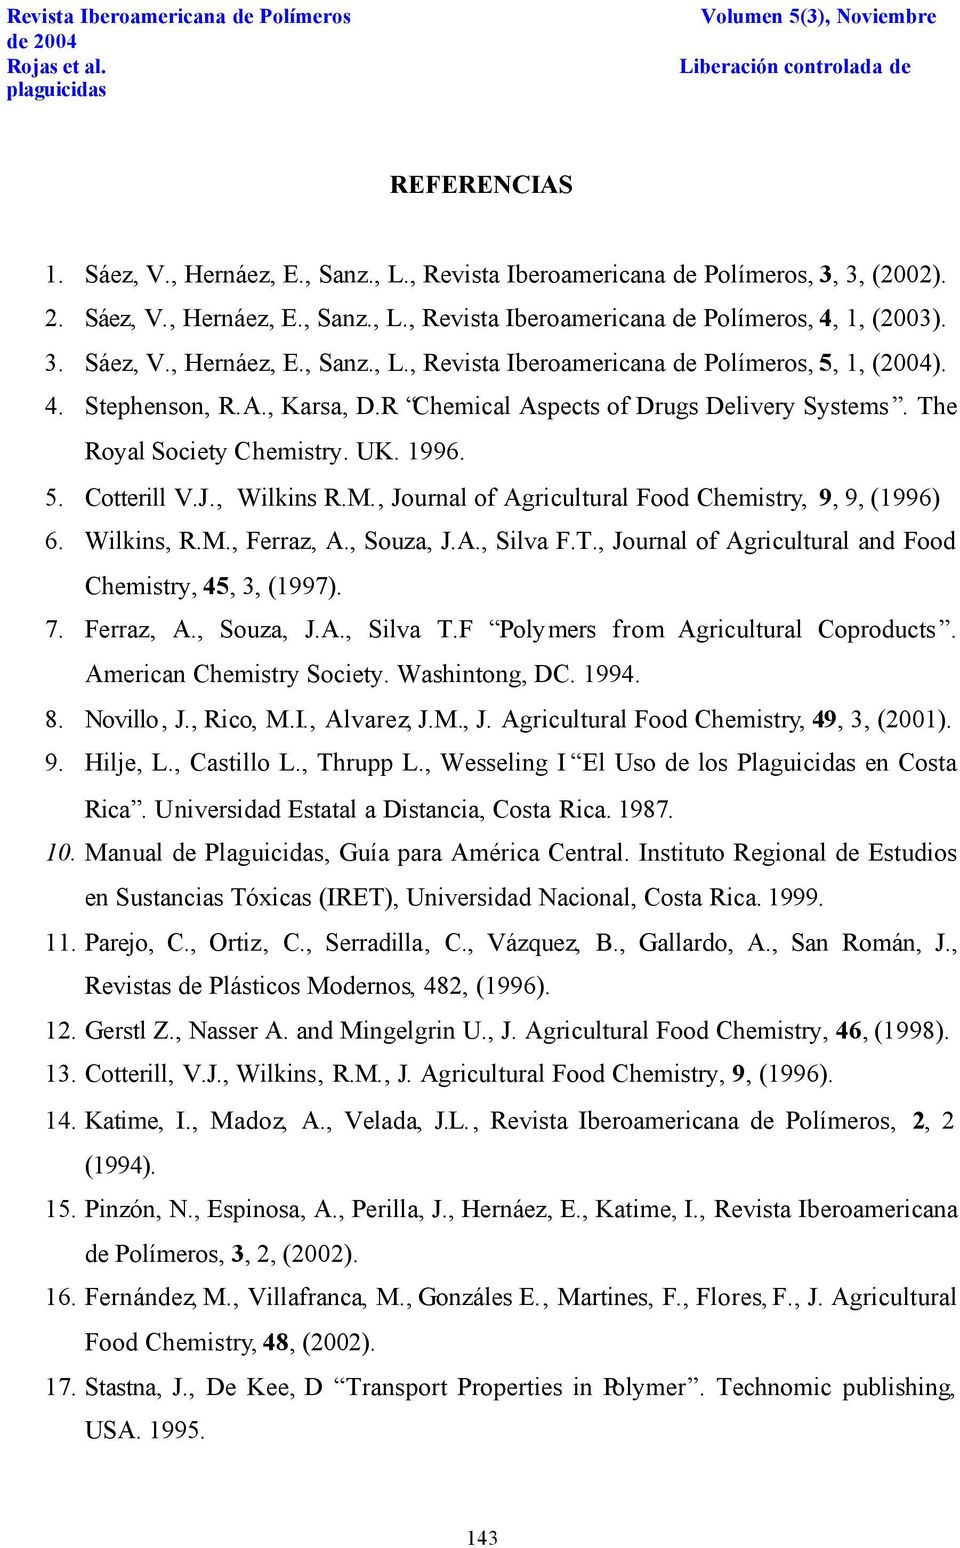 , Journal of Agricultural Food Chemistry, 9, 9, (1996) 6. Wilkins, R.M., Ferraz, A., Souza, J.A., Silva F.T., Journal of Agricultural and Food Chemistry, 45, 3, (1997). 7. Ferraz, A., Souza, J.A., Silva T.